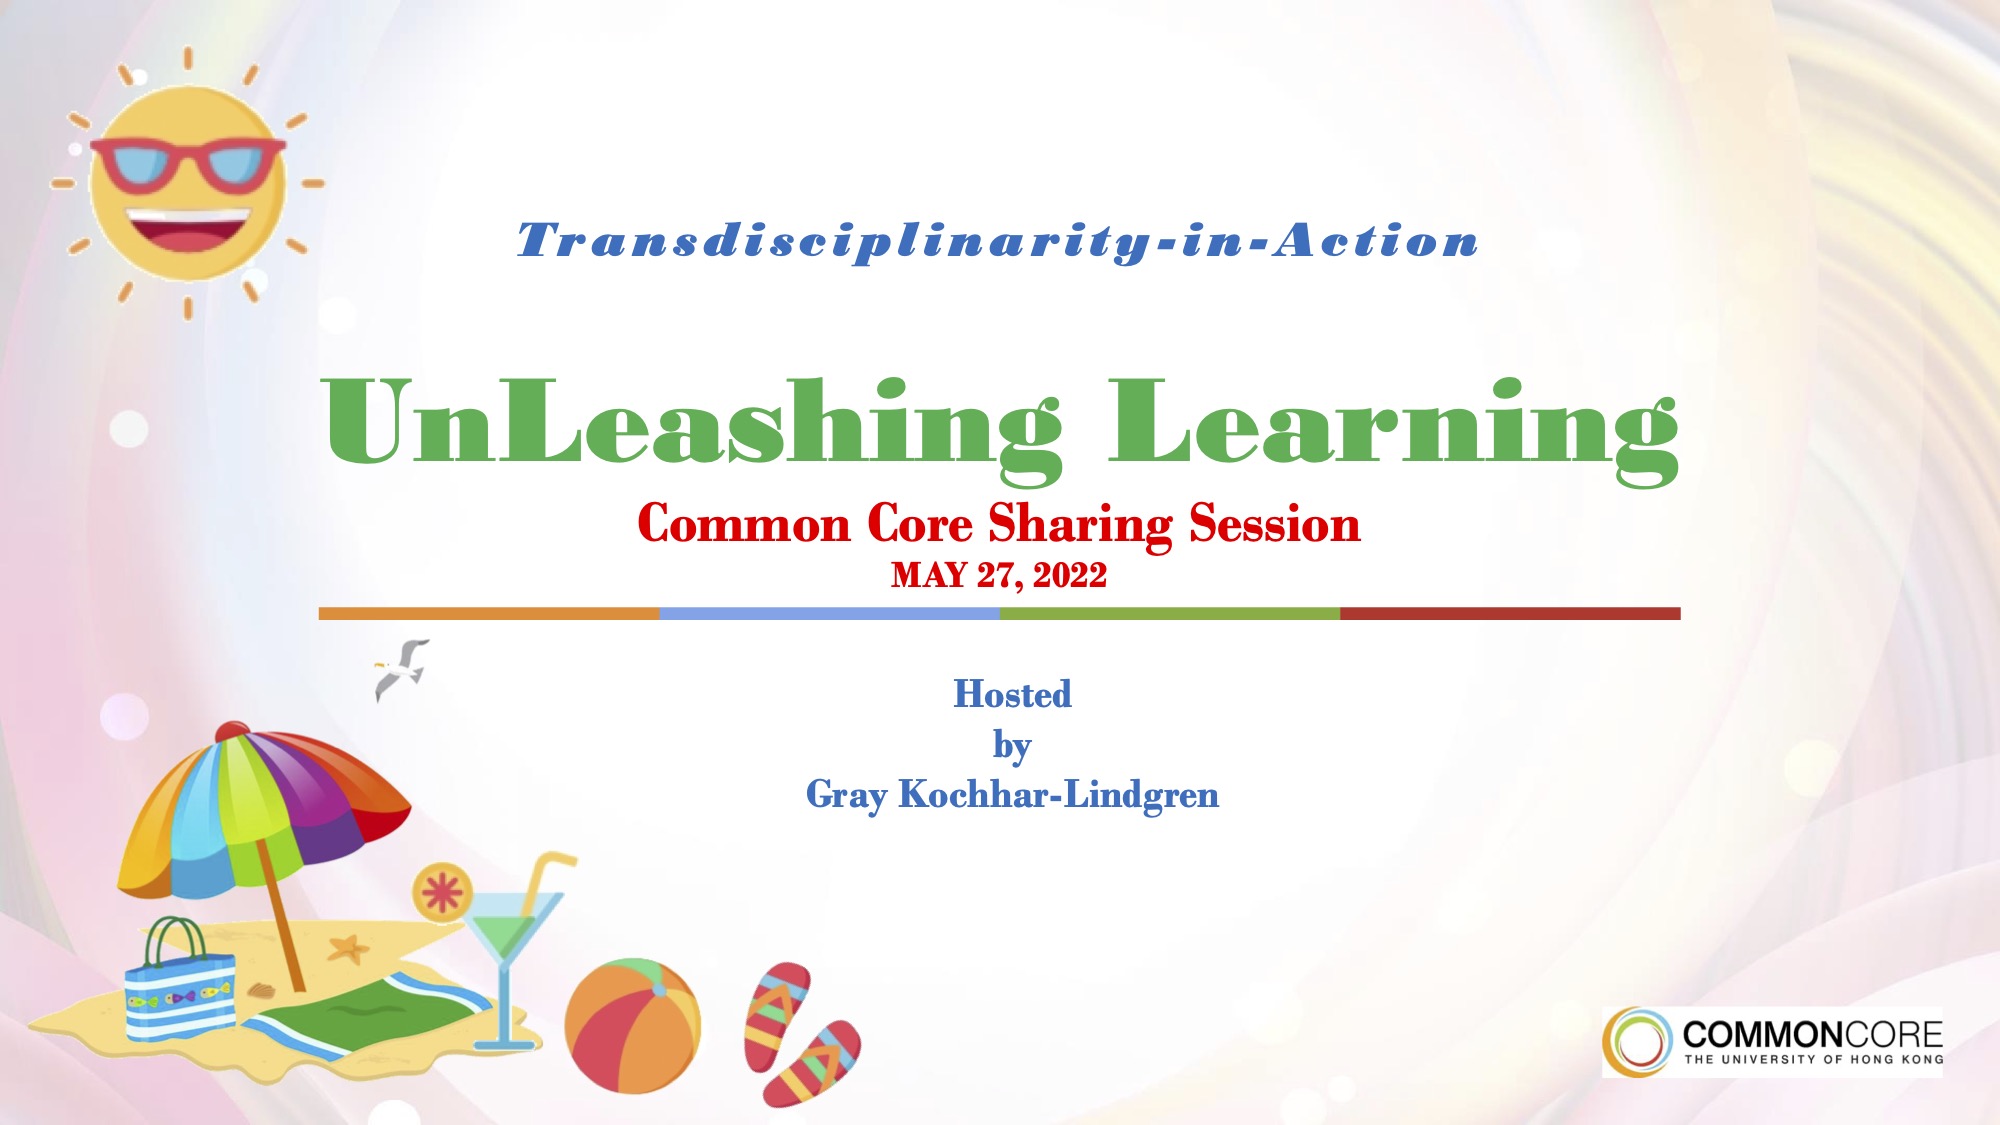 Common Core Sharing Session on May 27, 2022